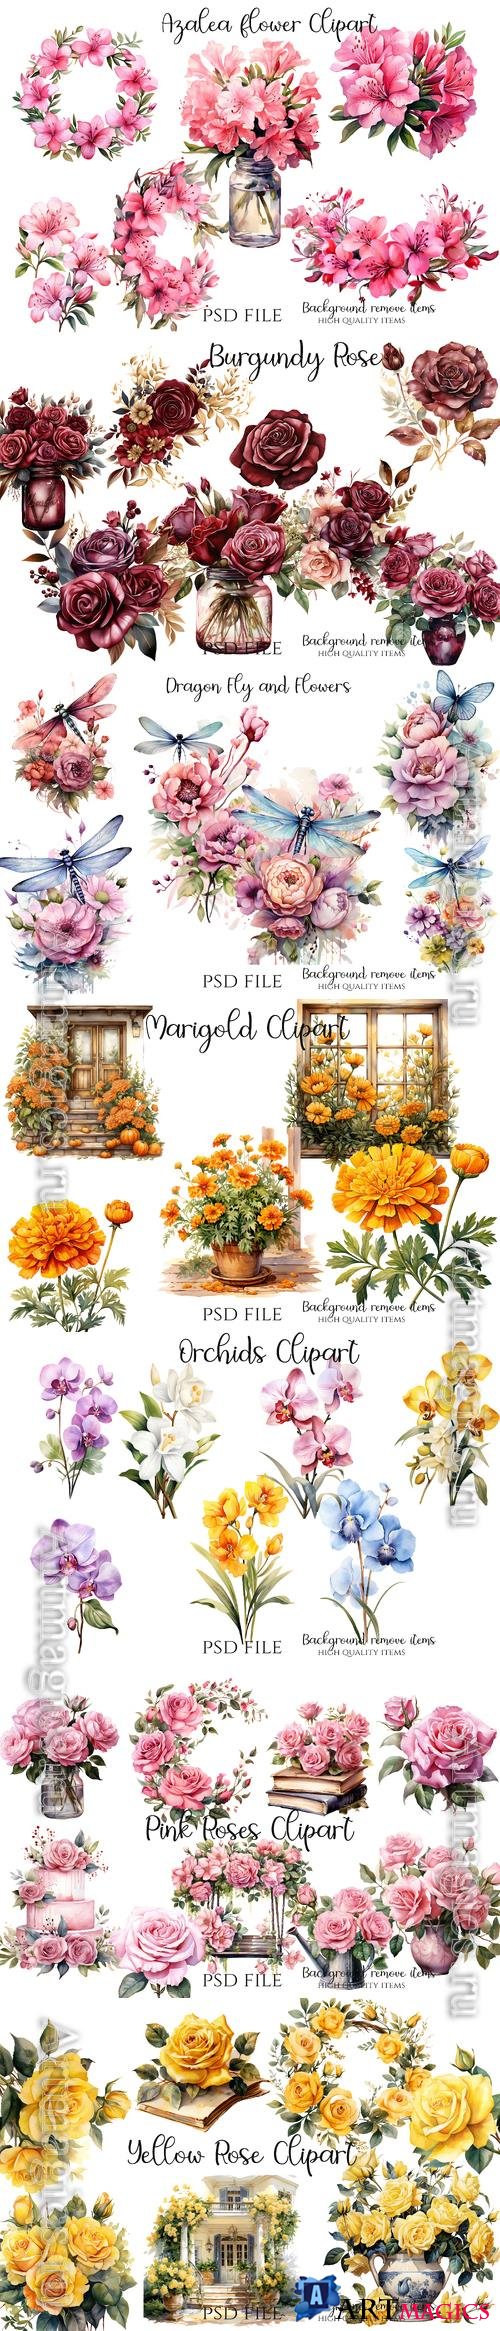 Flowers, roses, orchids, marigold, wildflowers, dragonfly - PSD illustration cliparts set